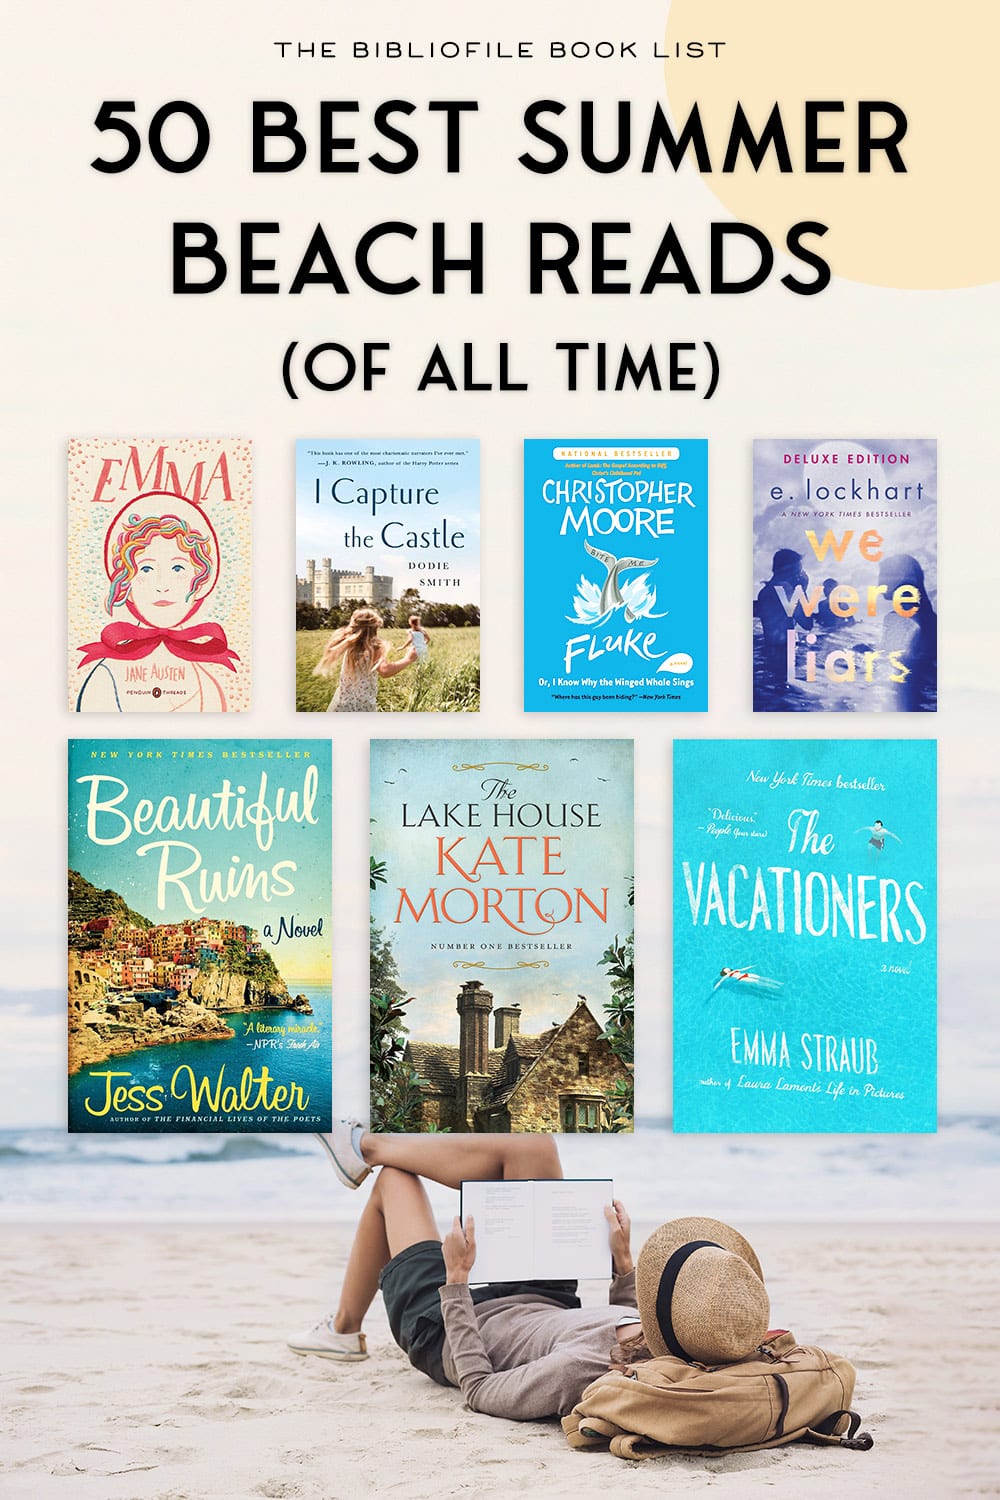 50 Best Summer Beach Reads of All Time (By Year) The Bibliofile